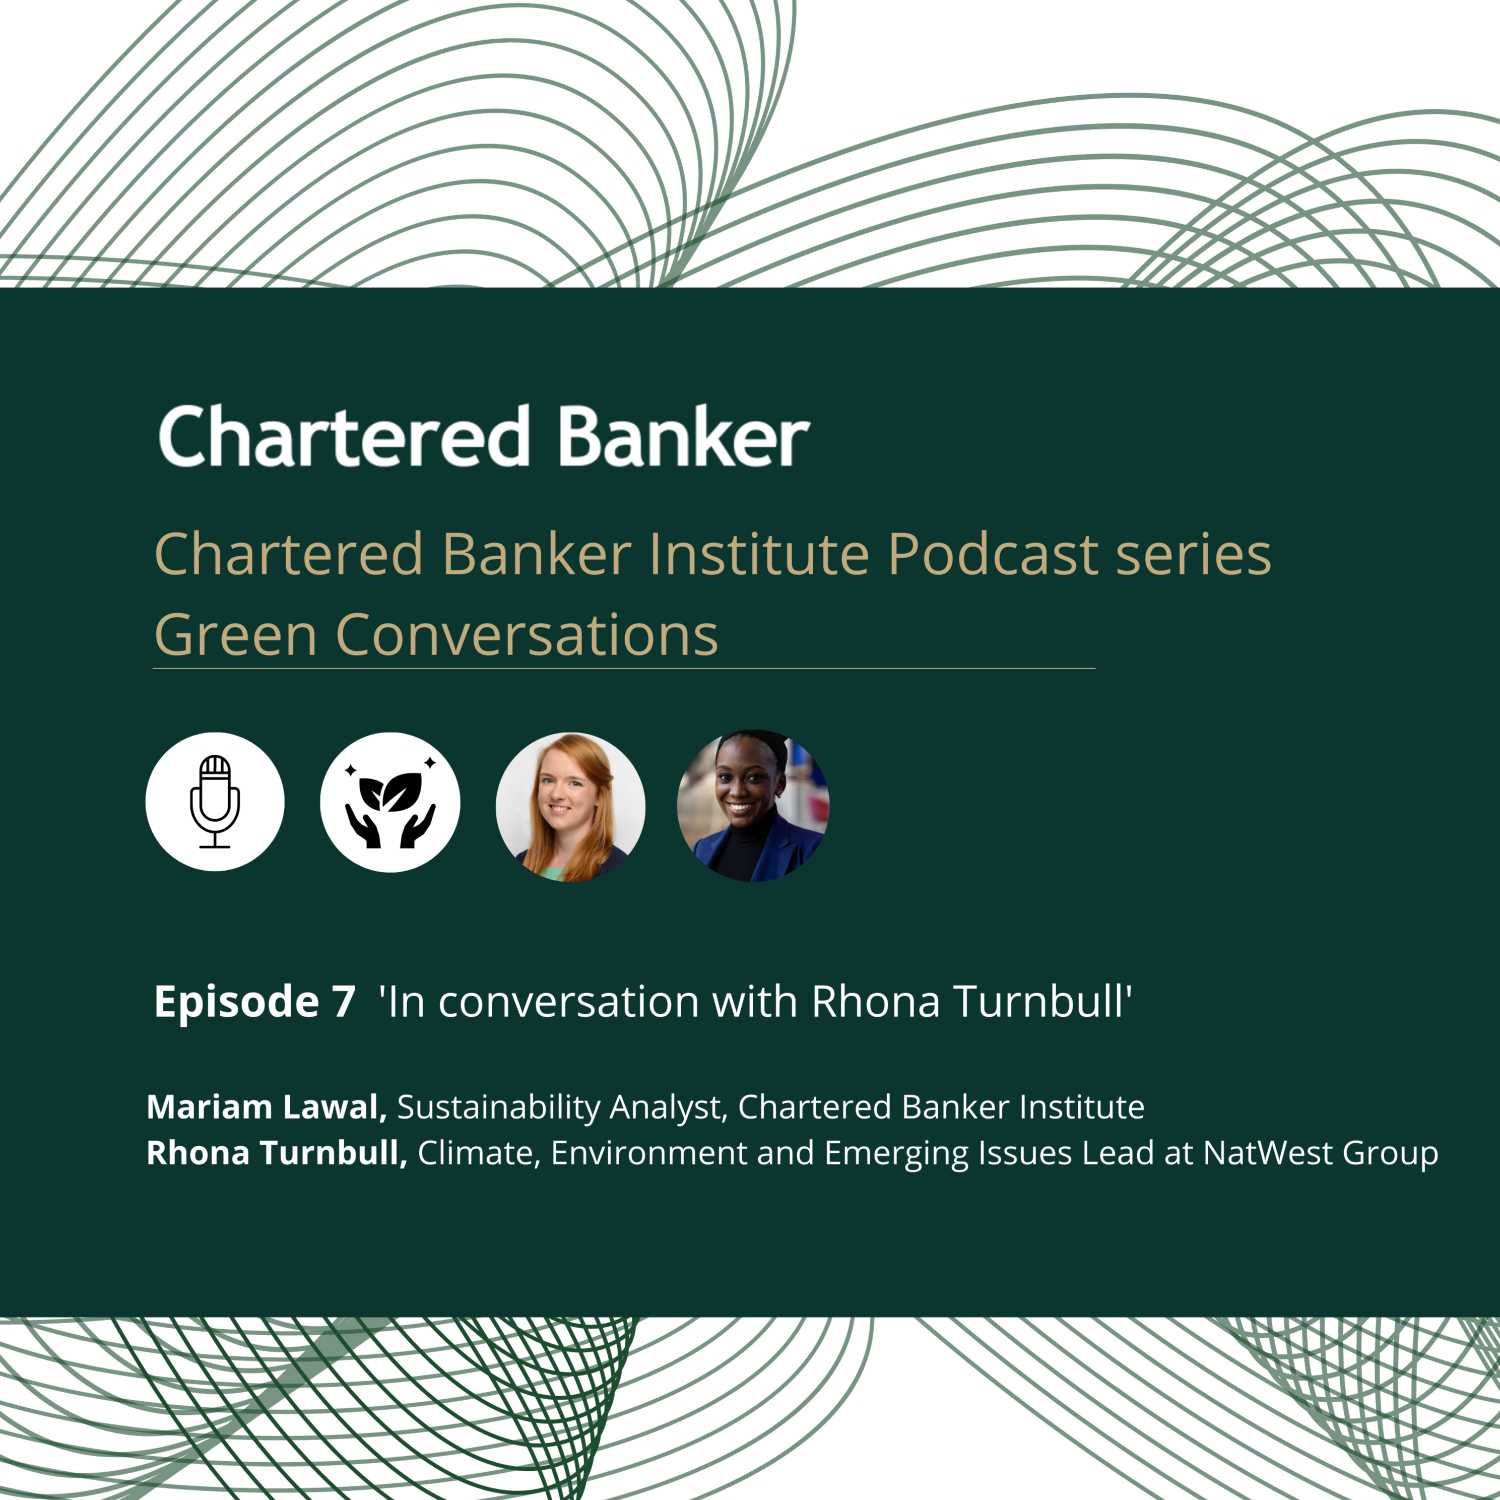 S3 E7 In conversation with Rhona Turnbull, Climate, Environment and Emerging Issues Lead at NatWest Group